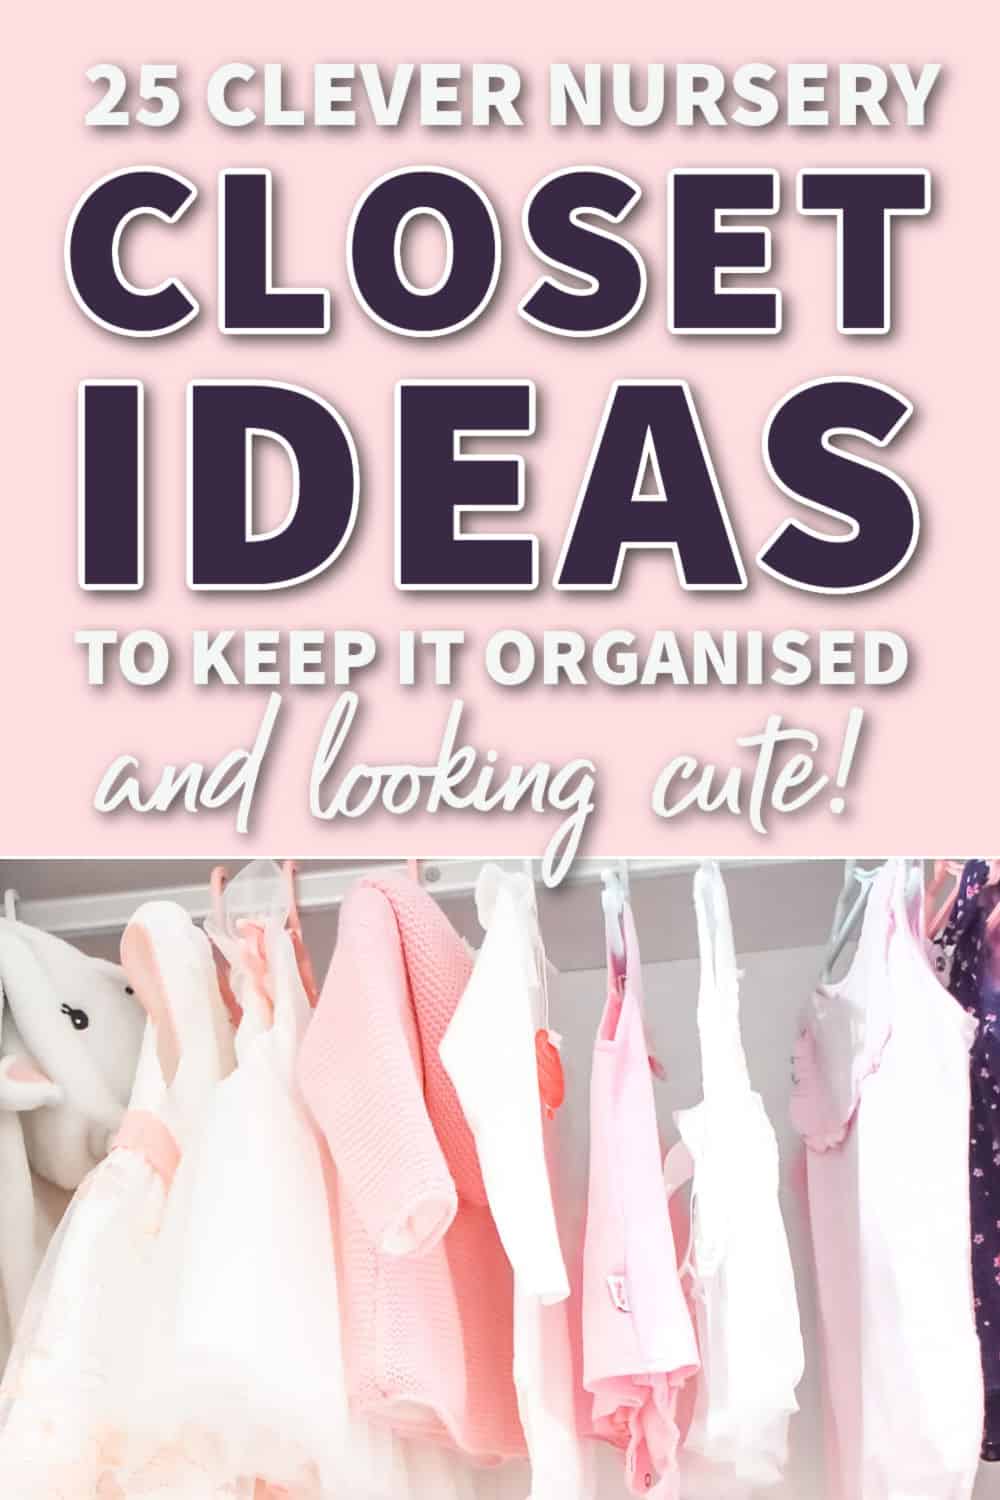 25 best ideas on how to organize baby’s closet, to keep it neat and looking cute